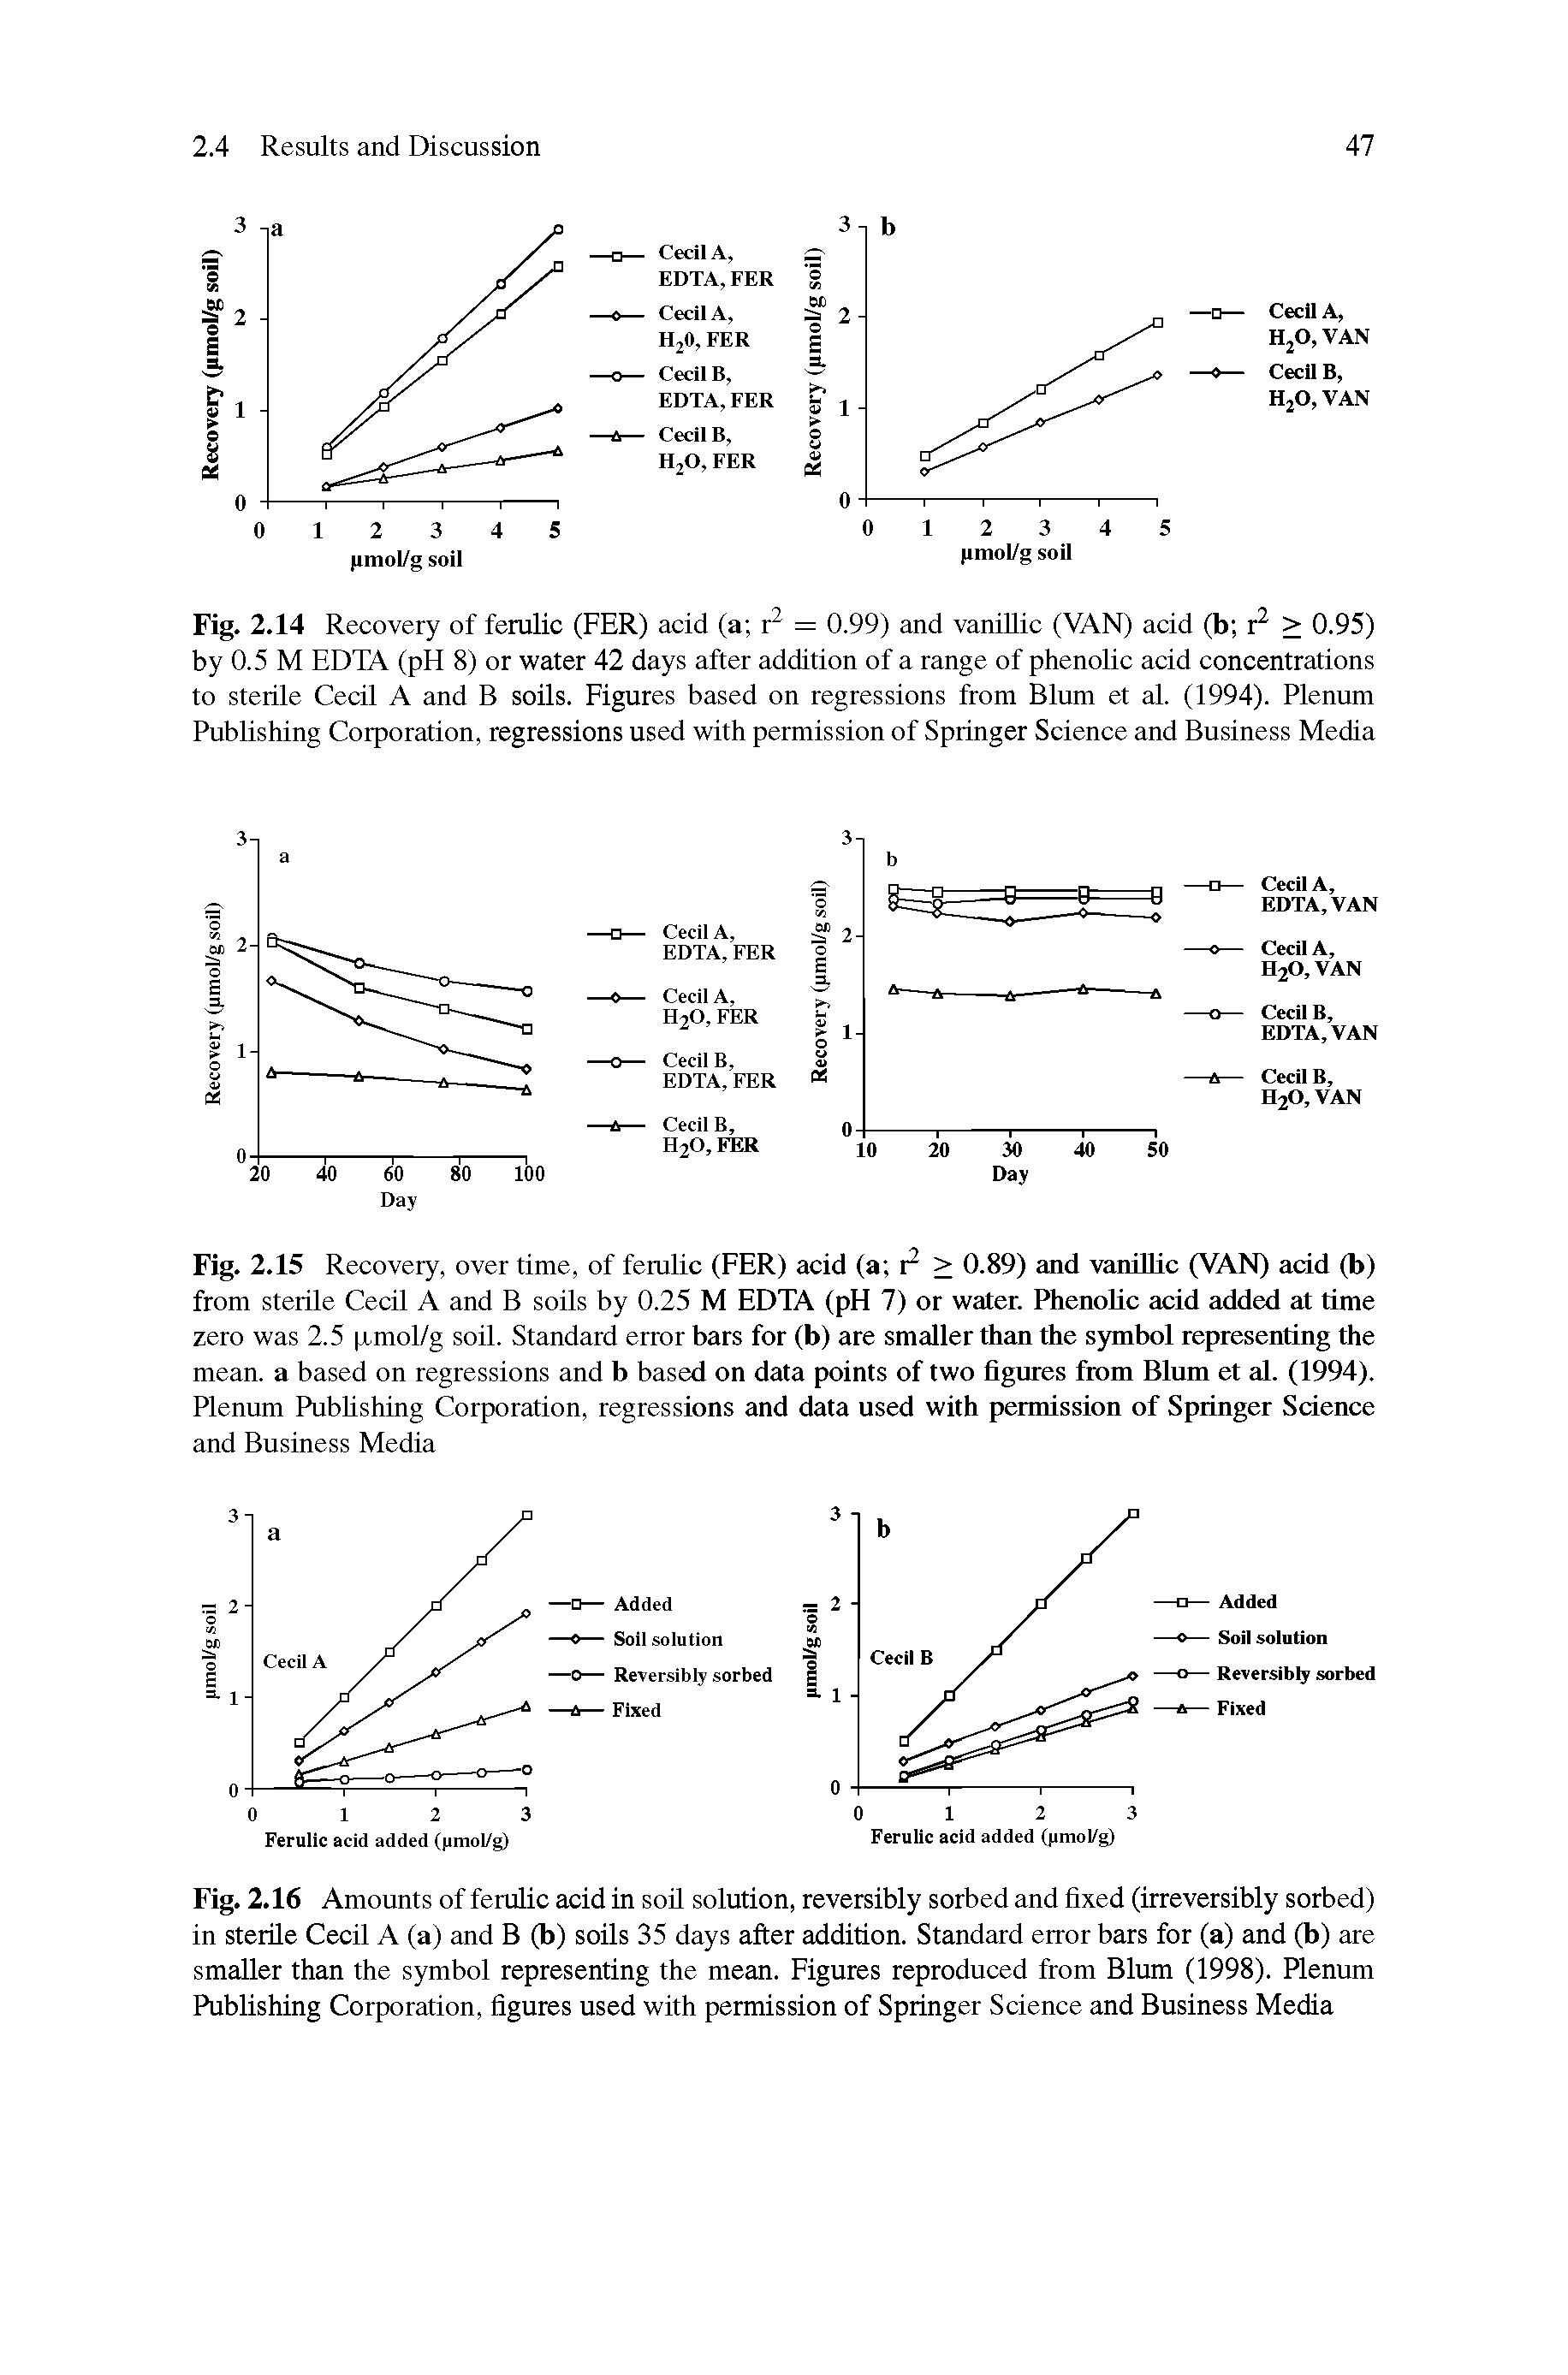 Fig. 2.15 Recovery, over time, of ferulic (FER) acid (a P > 0.89) and vanillic (VAN) add (b) from sterile Cecil A and B soils by 0.25 M EDTA (pH 7) or water. Phenolic add added at time zero was 2.5 xmol/g soil. Standard error bars for (b) are smaller than the symbol representing the mean, a based on regressions and b based on data points of two figures from Blum et al. (1994). Plenum Publishing Corporation, regressions and data used with permission of Springer Sdence and Business Media...